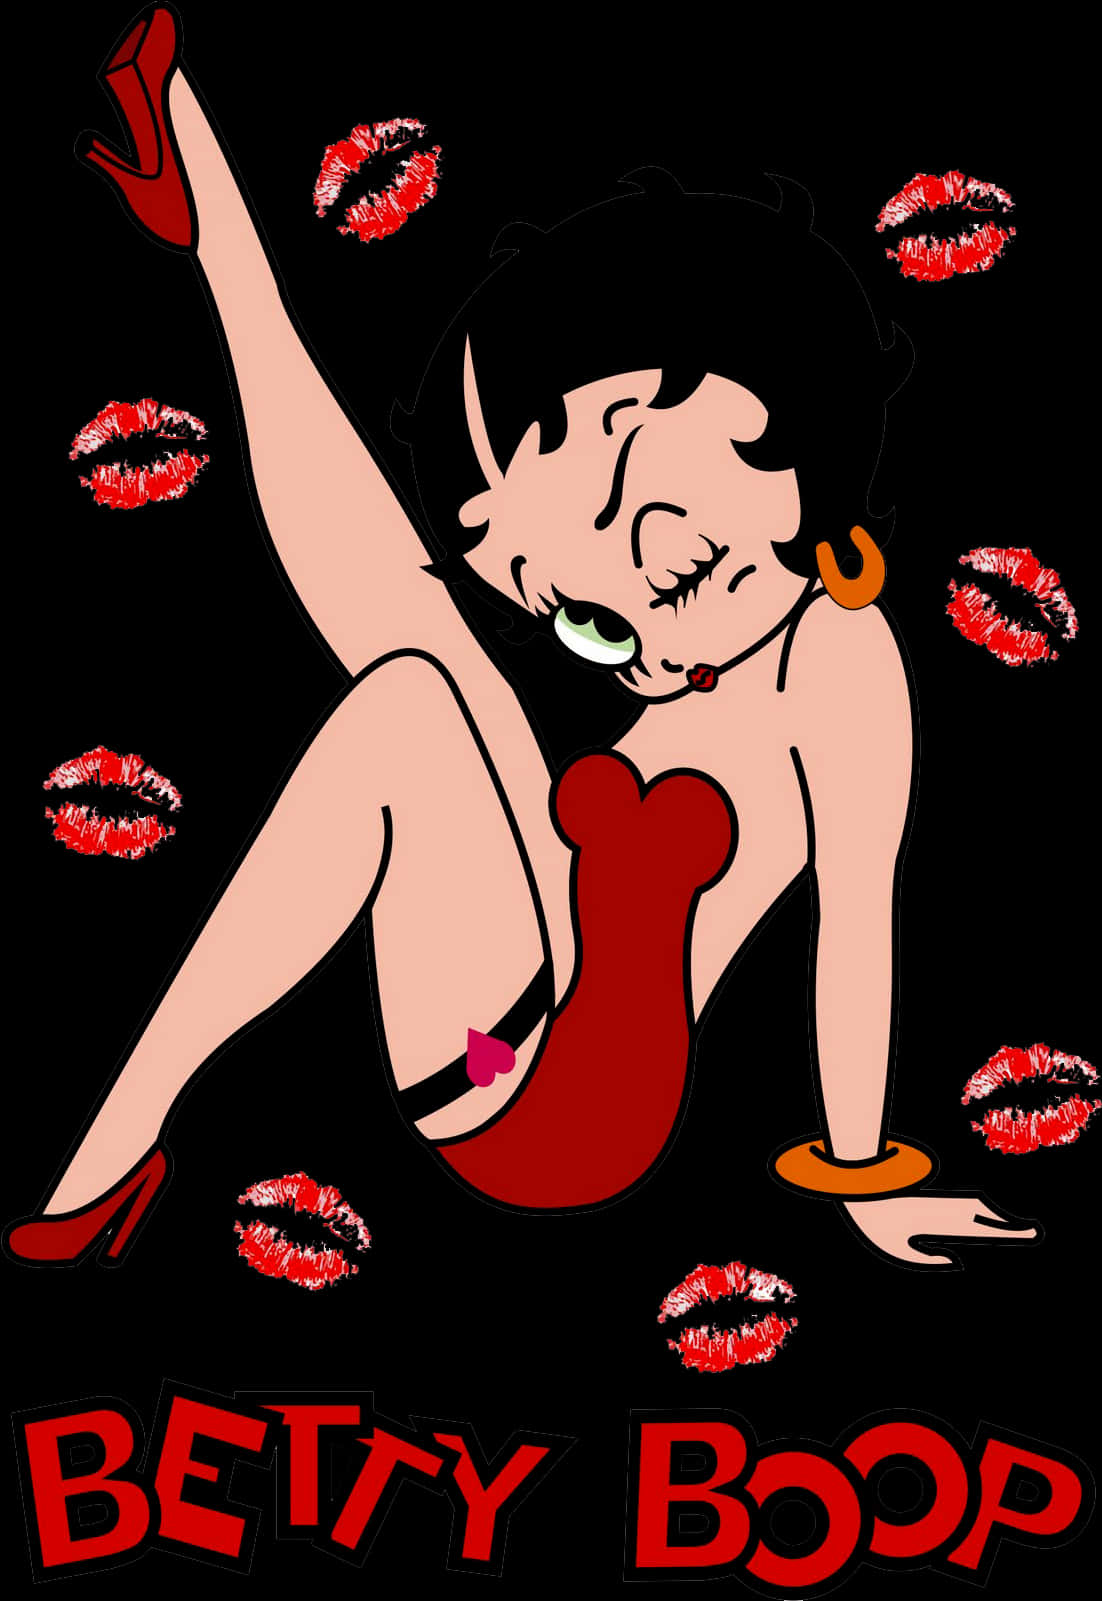 Cartoon Of A Woman In Red Lingerie